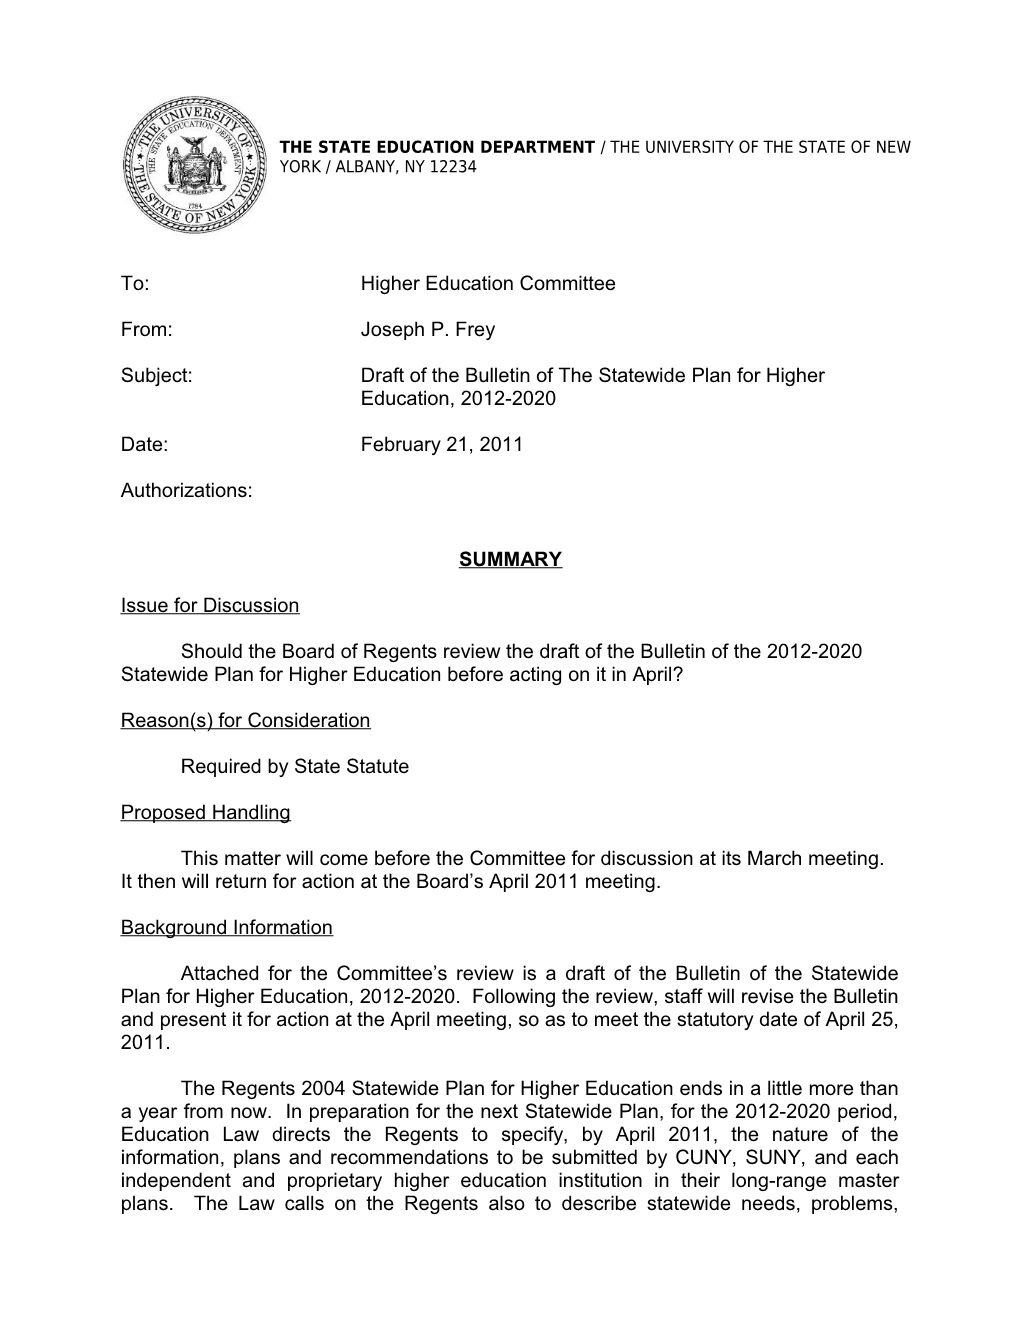 Subject:Draft of the Bulletin of the Statewide Plan for Higher Education, 2012-2020